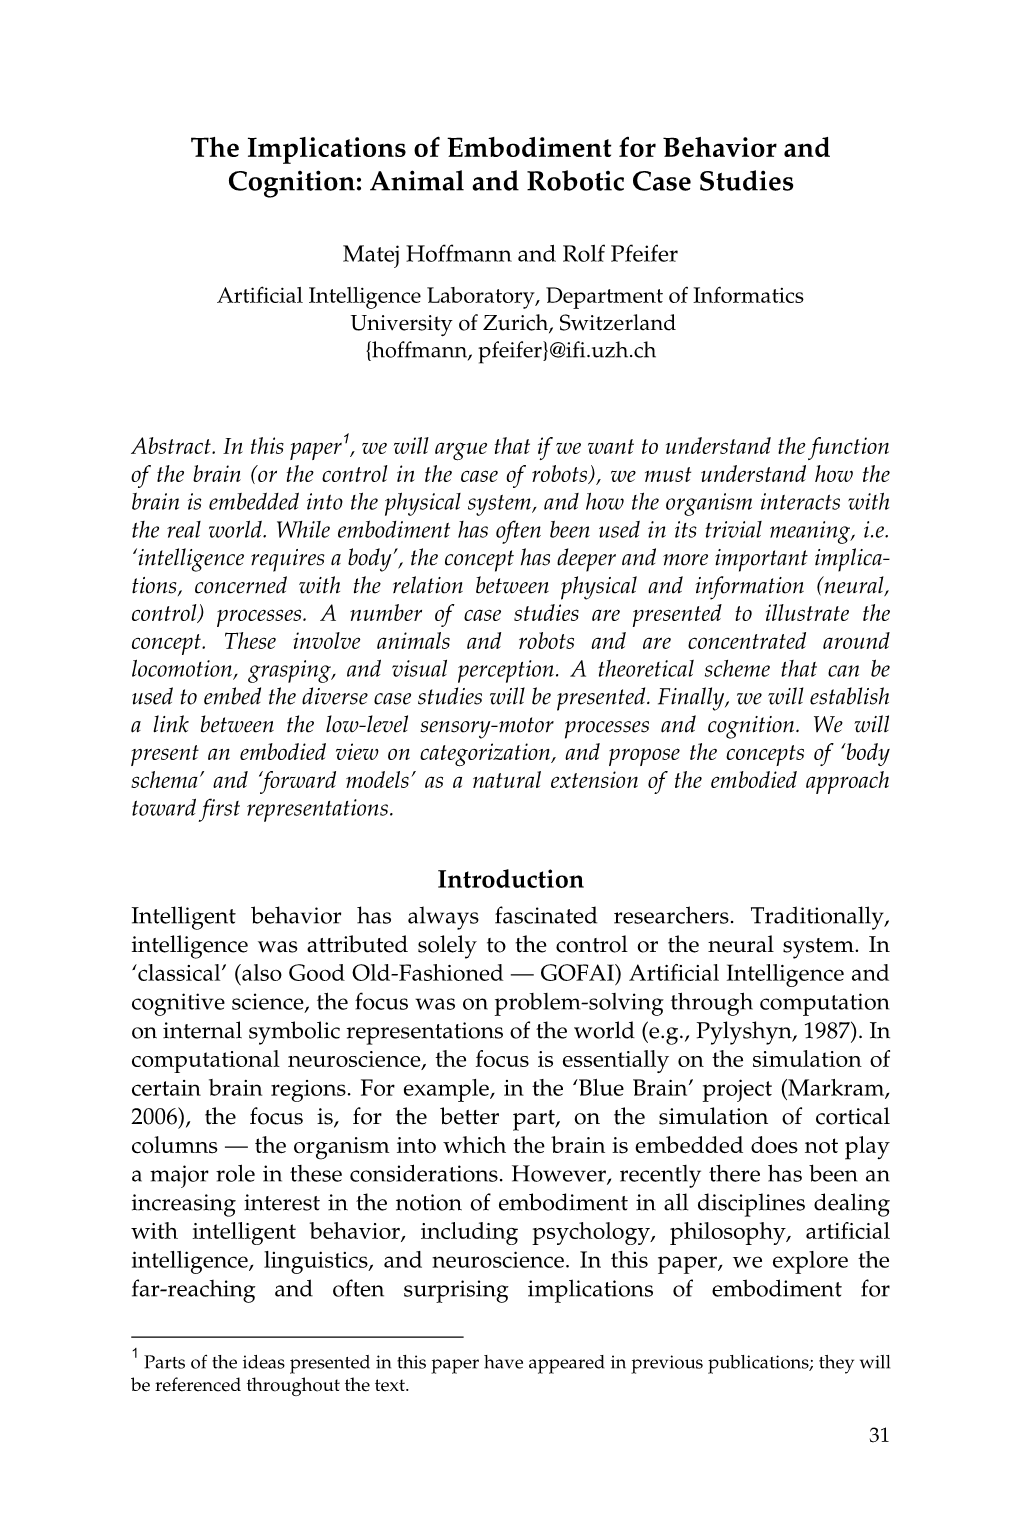 The Implications of Embodiment for Behavior and Cognition: Animal and Robotic Case Studies